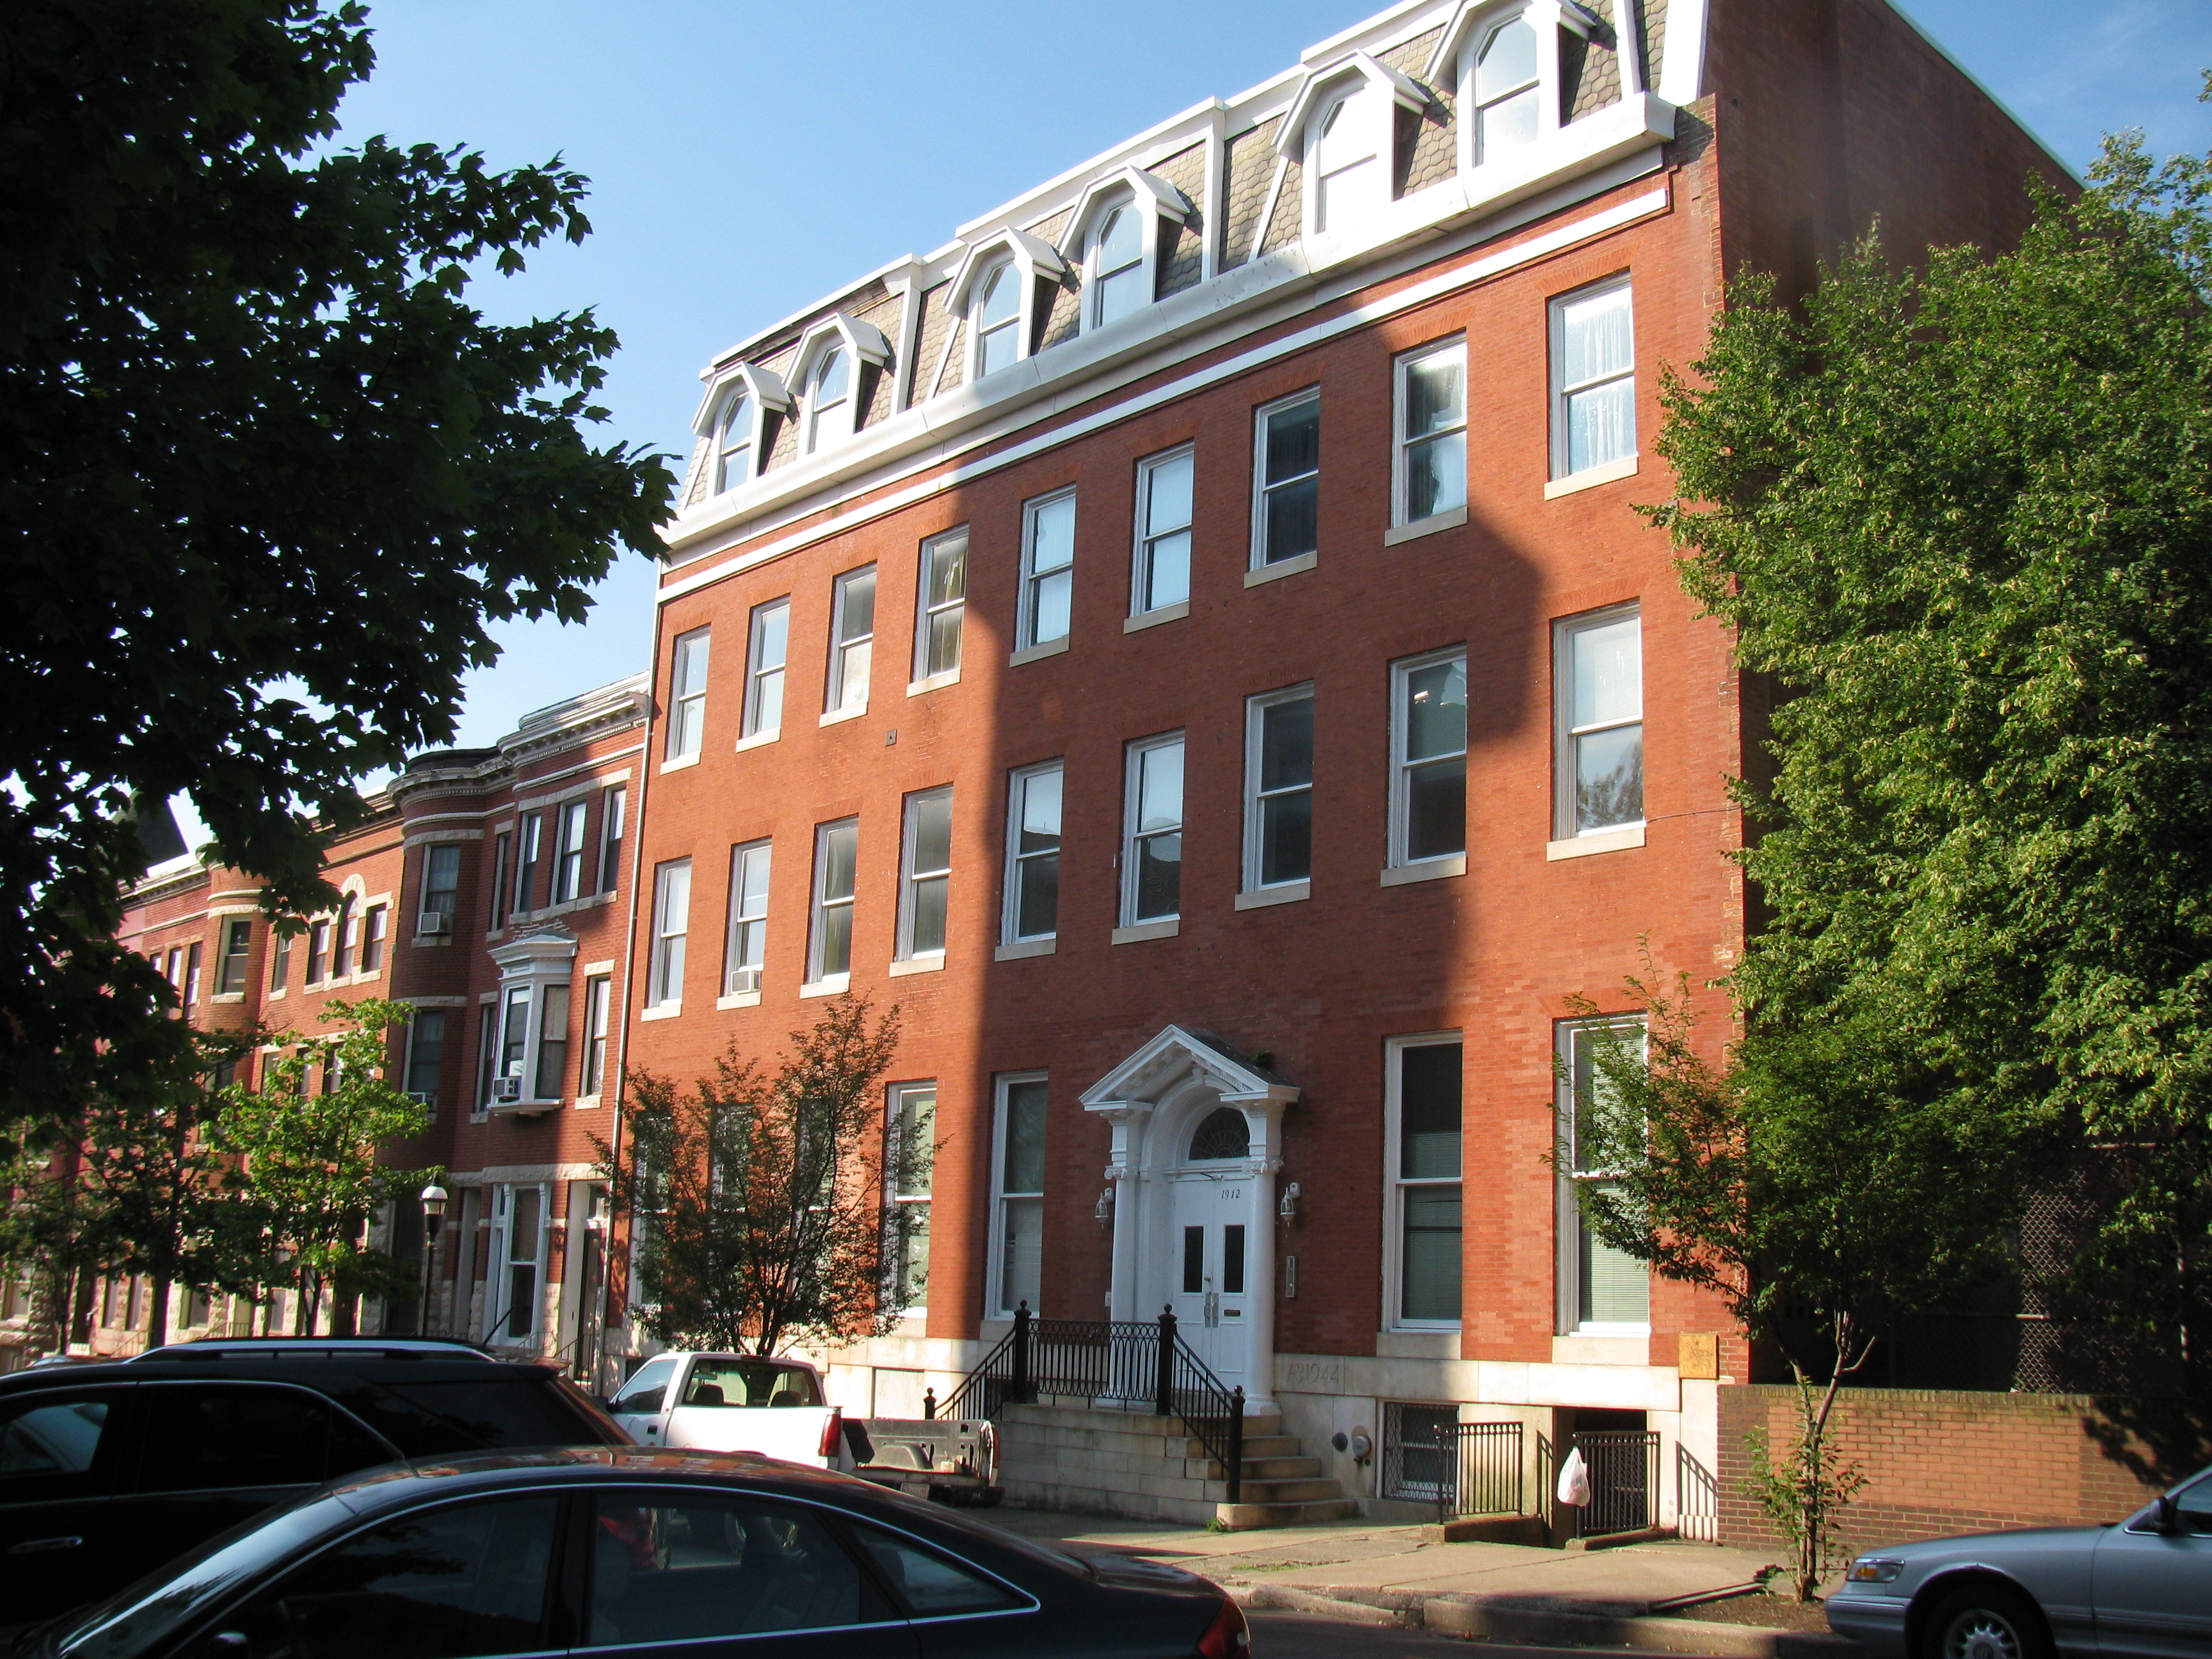 The 4 story building is clad in red brick and has a mansard roof.